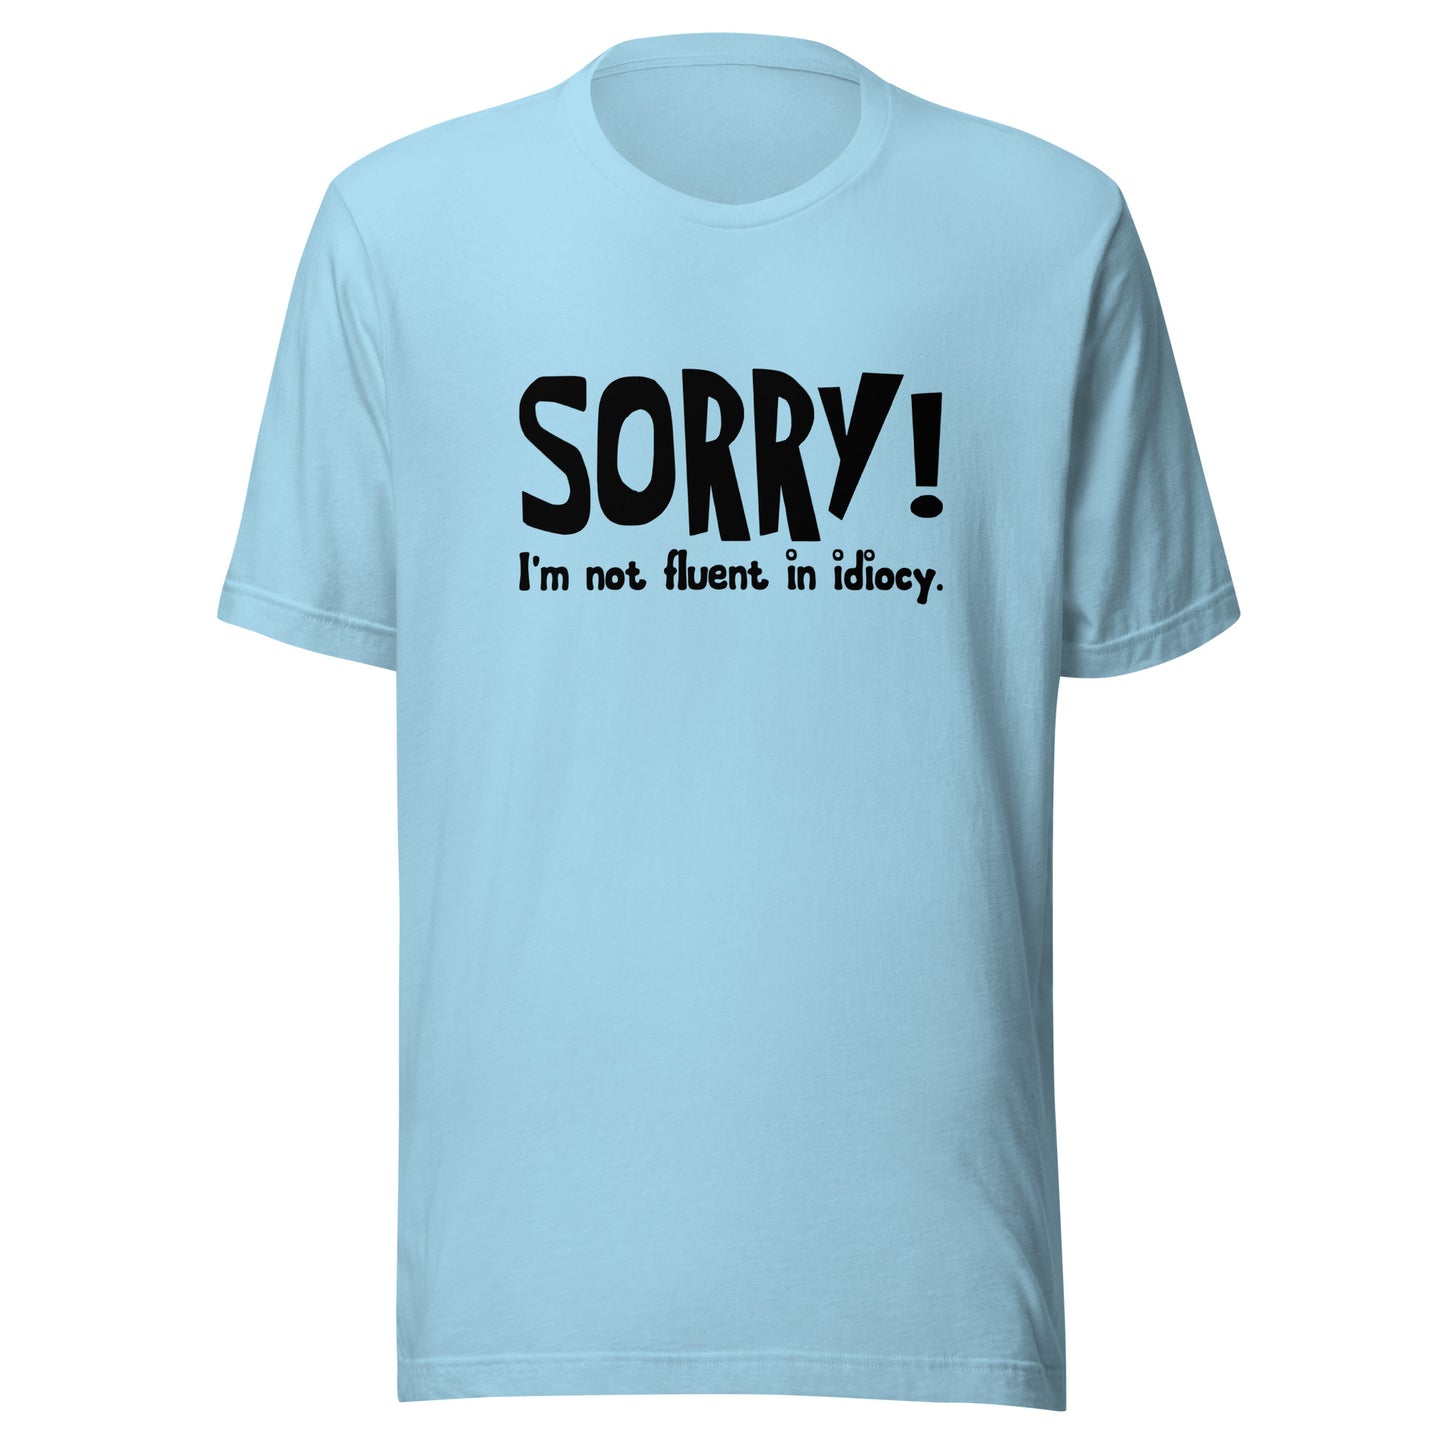 Sorry! I'm not fluent in idiocy T-shirt